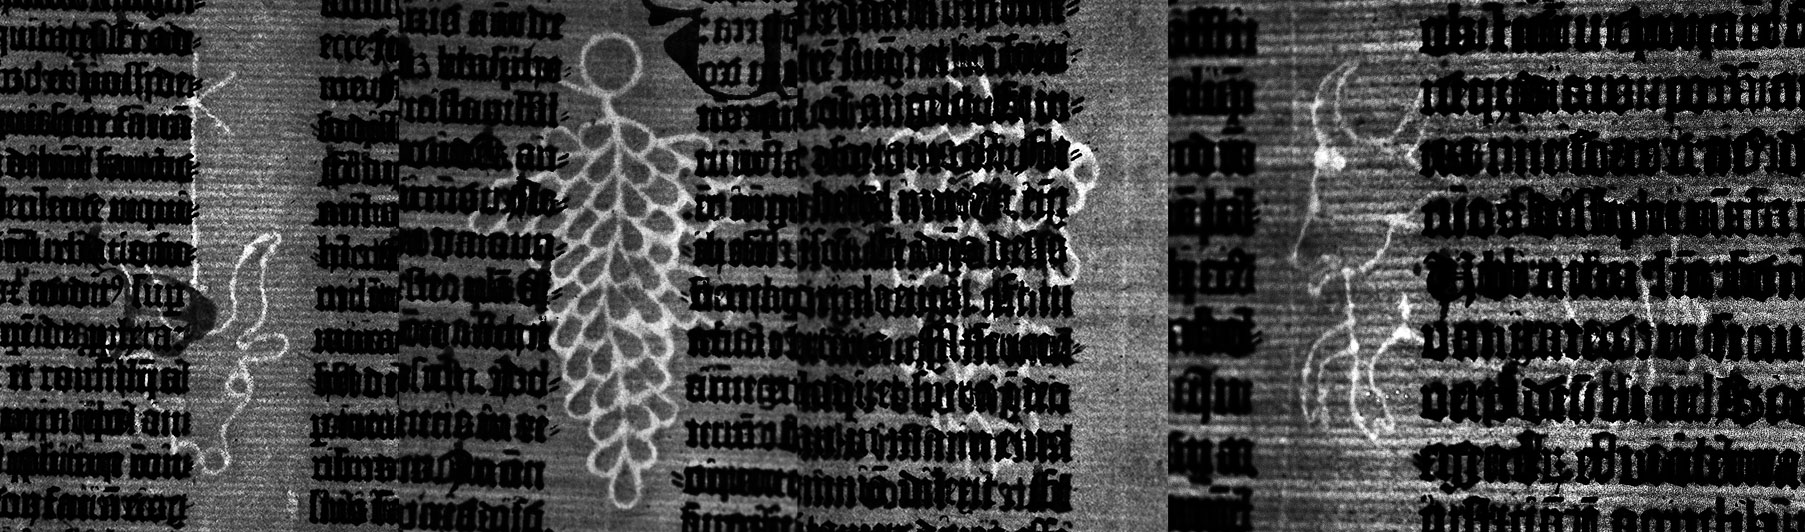 The four basic watermarks that appear in copies of the Gutenberg Bible. These photographs from the Ransom Center's copy were taken with the aid of transmitted light and have been edited to increase contrast.